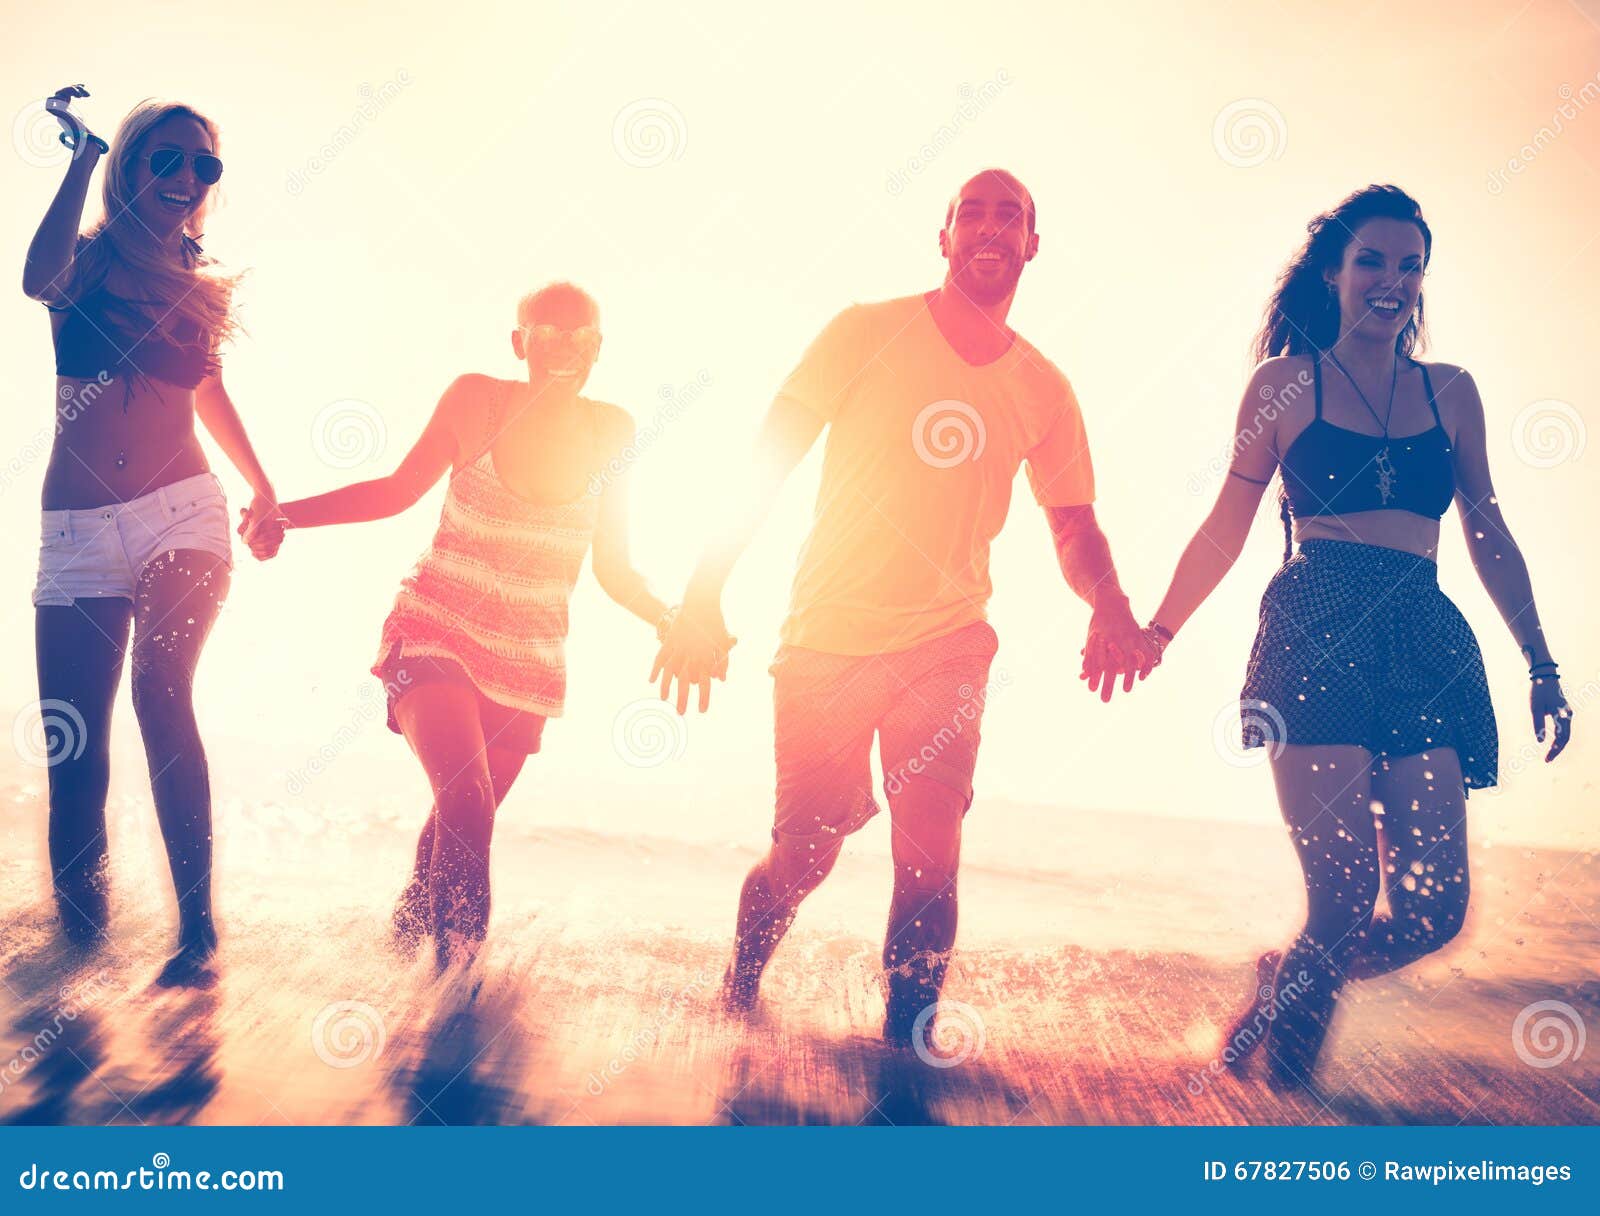 Friendship Freedom Beach Summer Holiday Concept Stock Photo - Image of